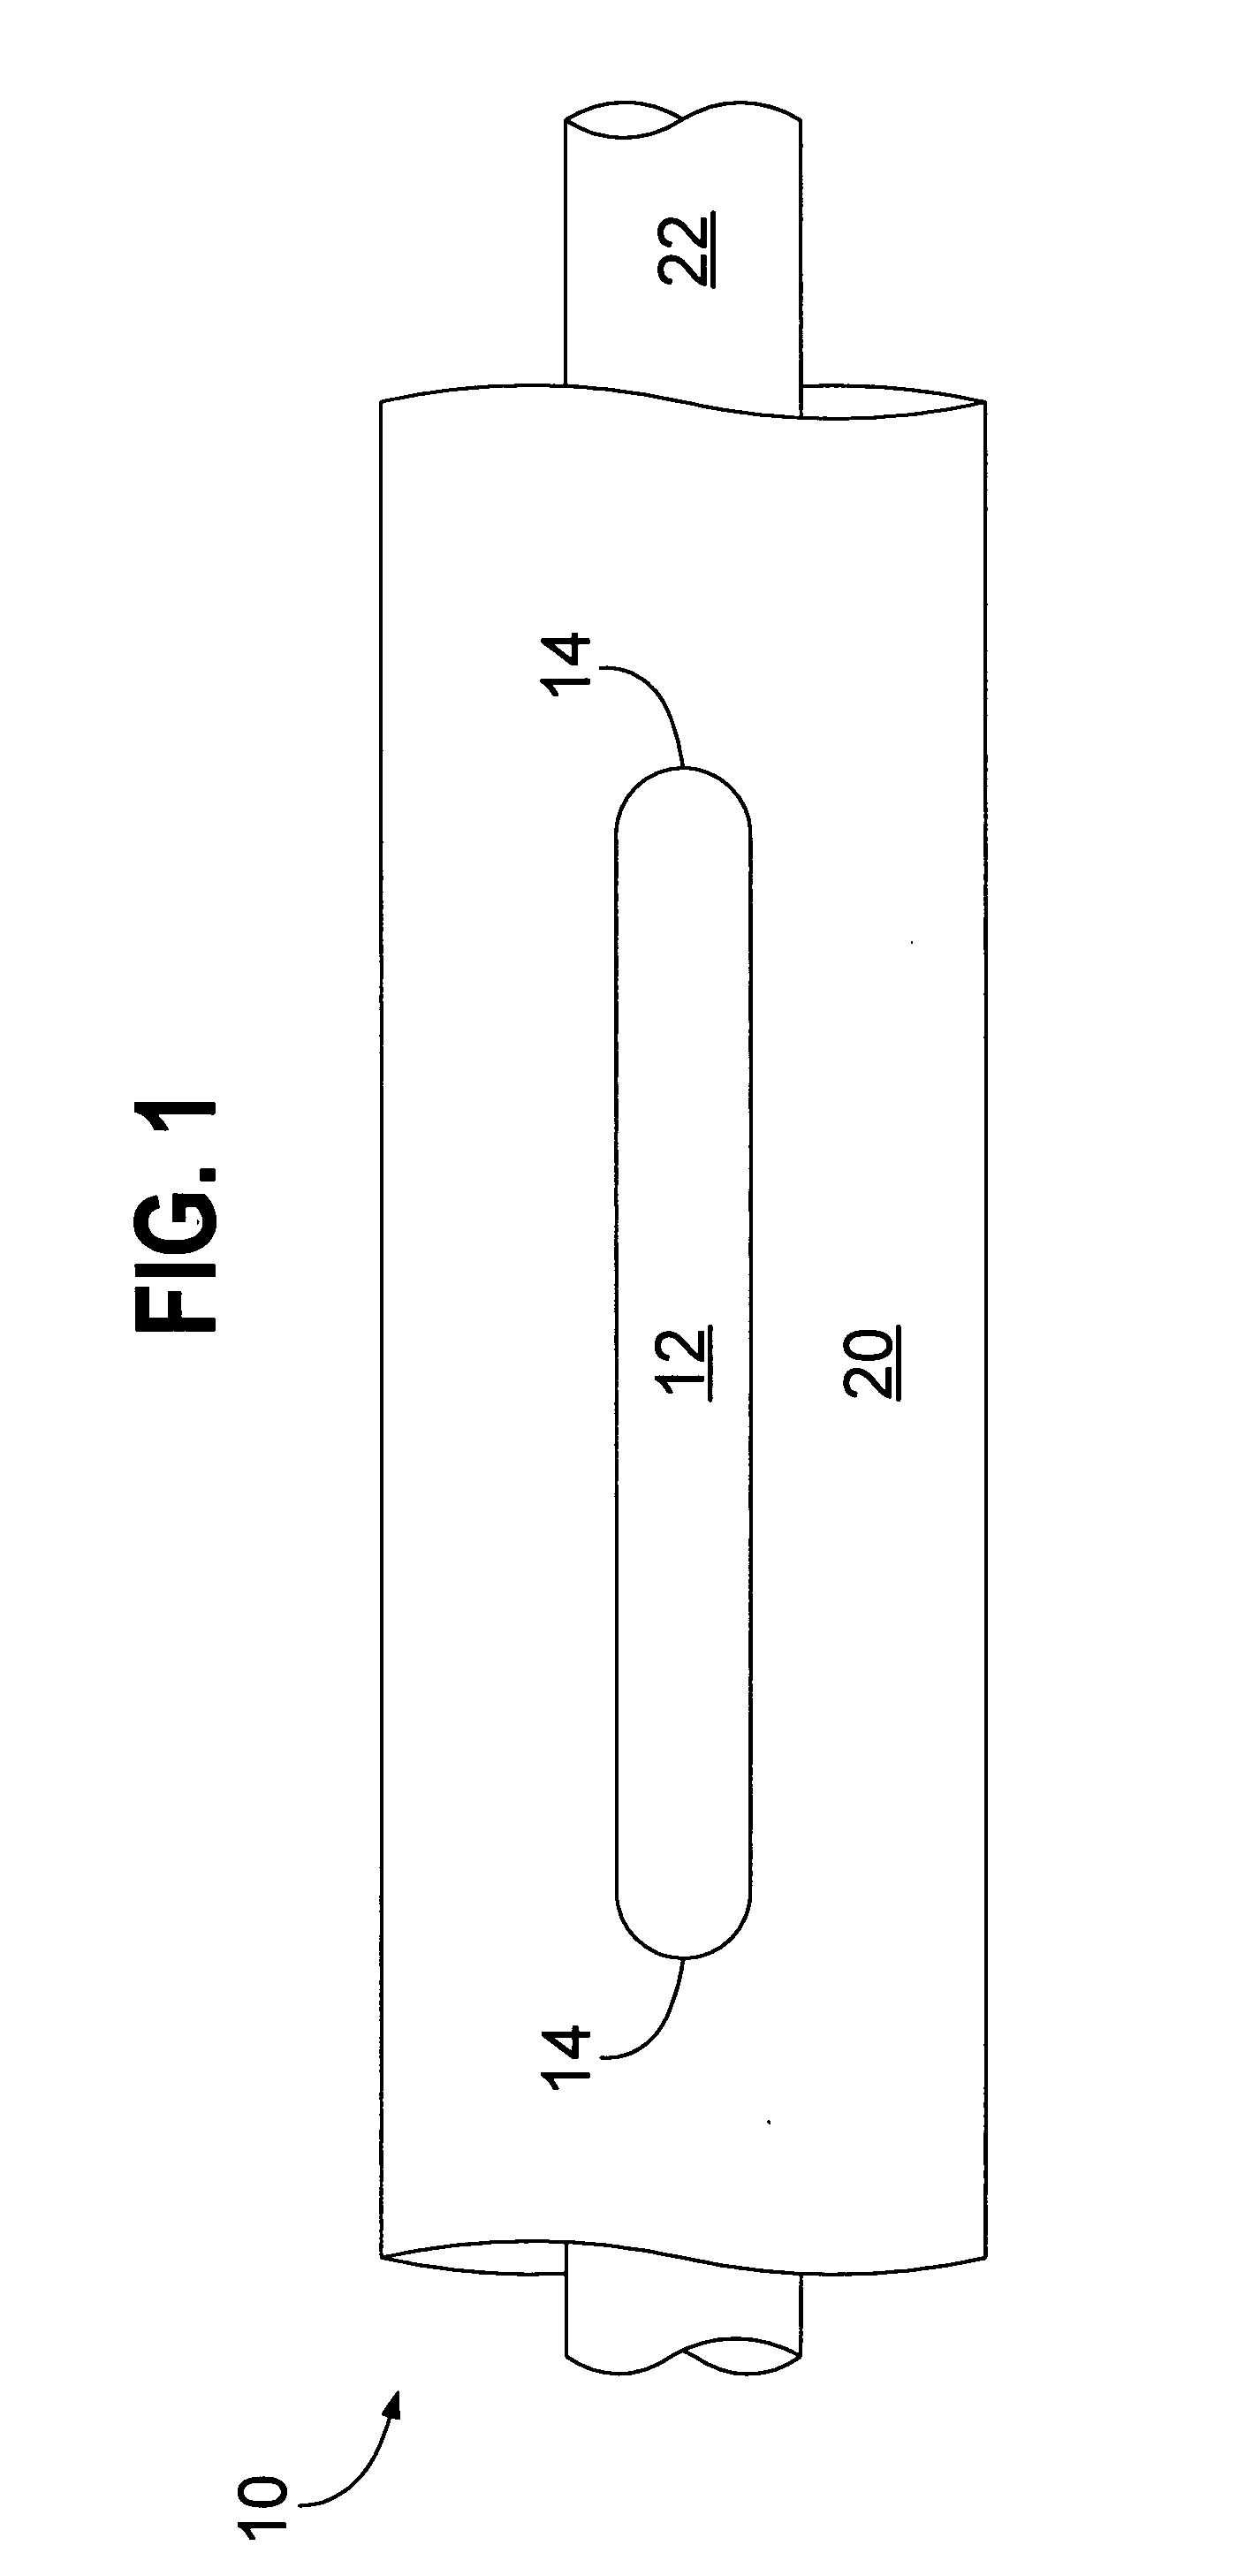 Apparatus and method to increase apparent resonant slot length in a slotted coaxial antenna